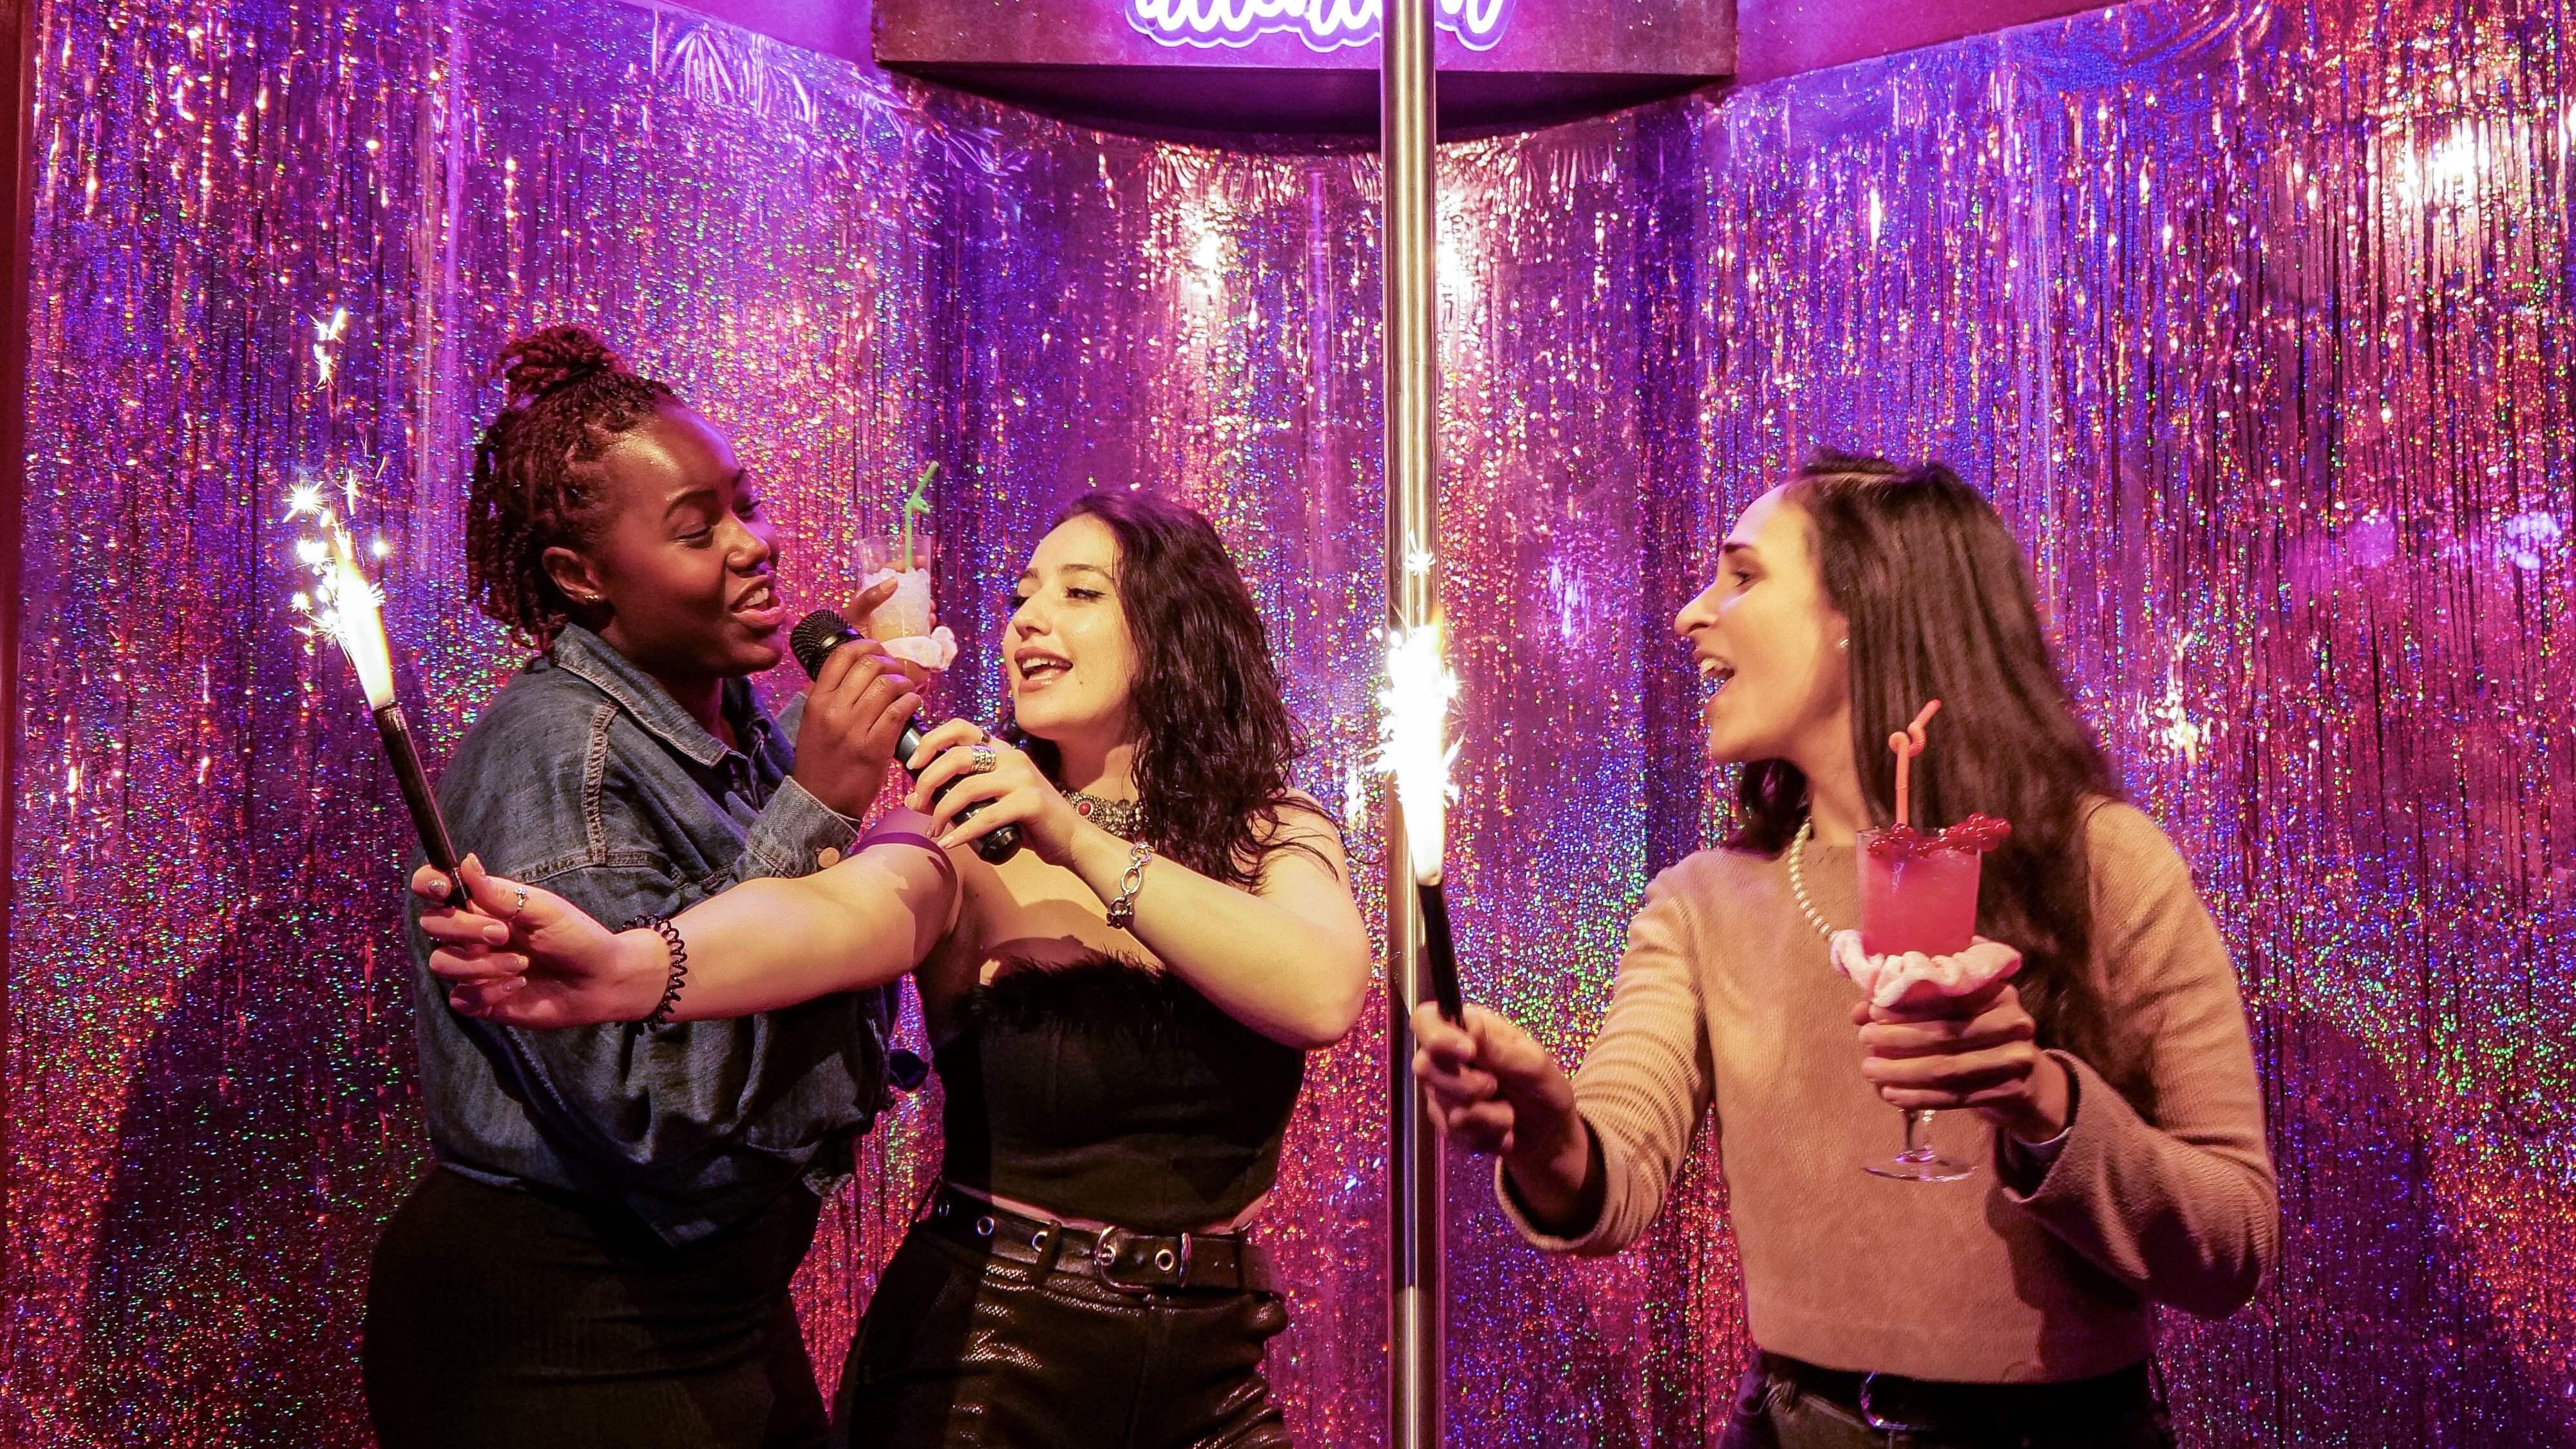 Three women doing karaoke with celebration sparklers in hand